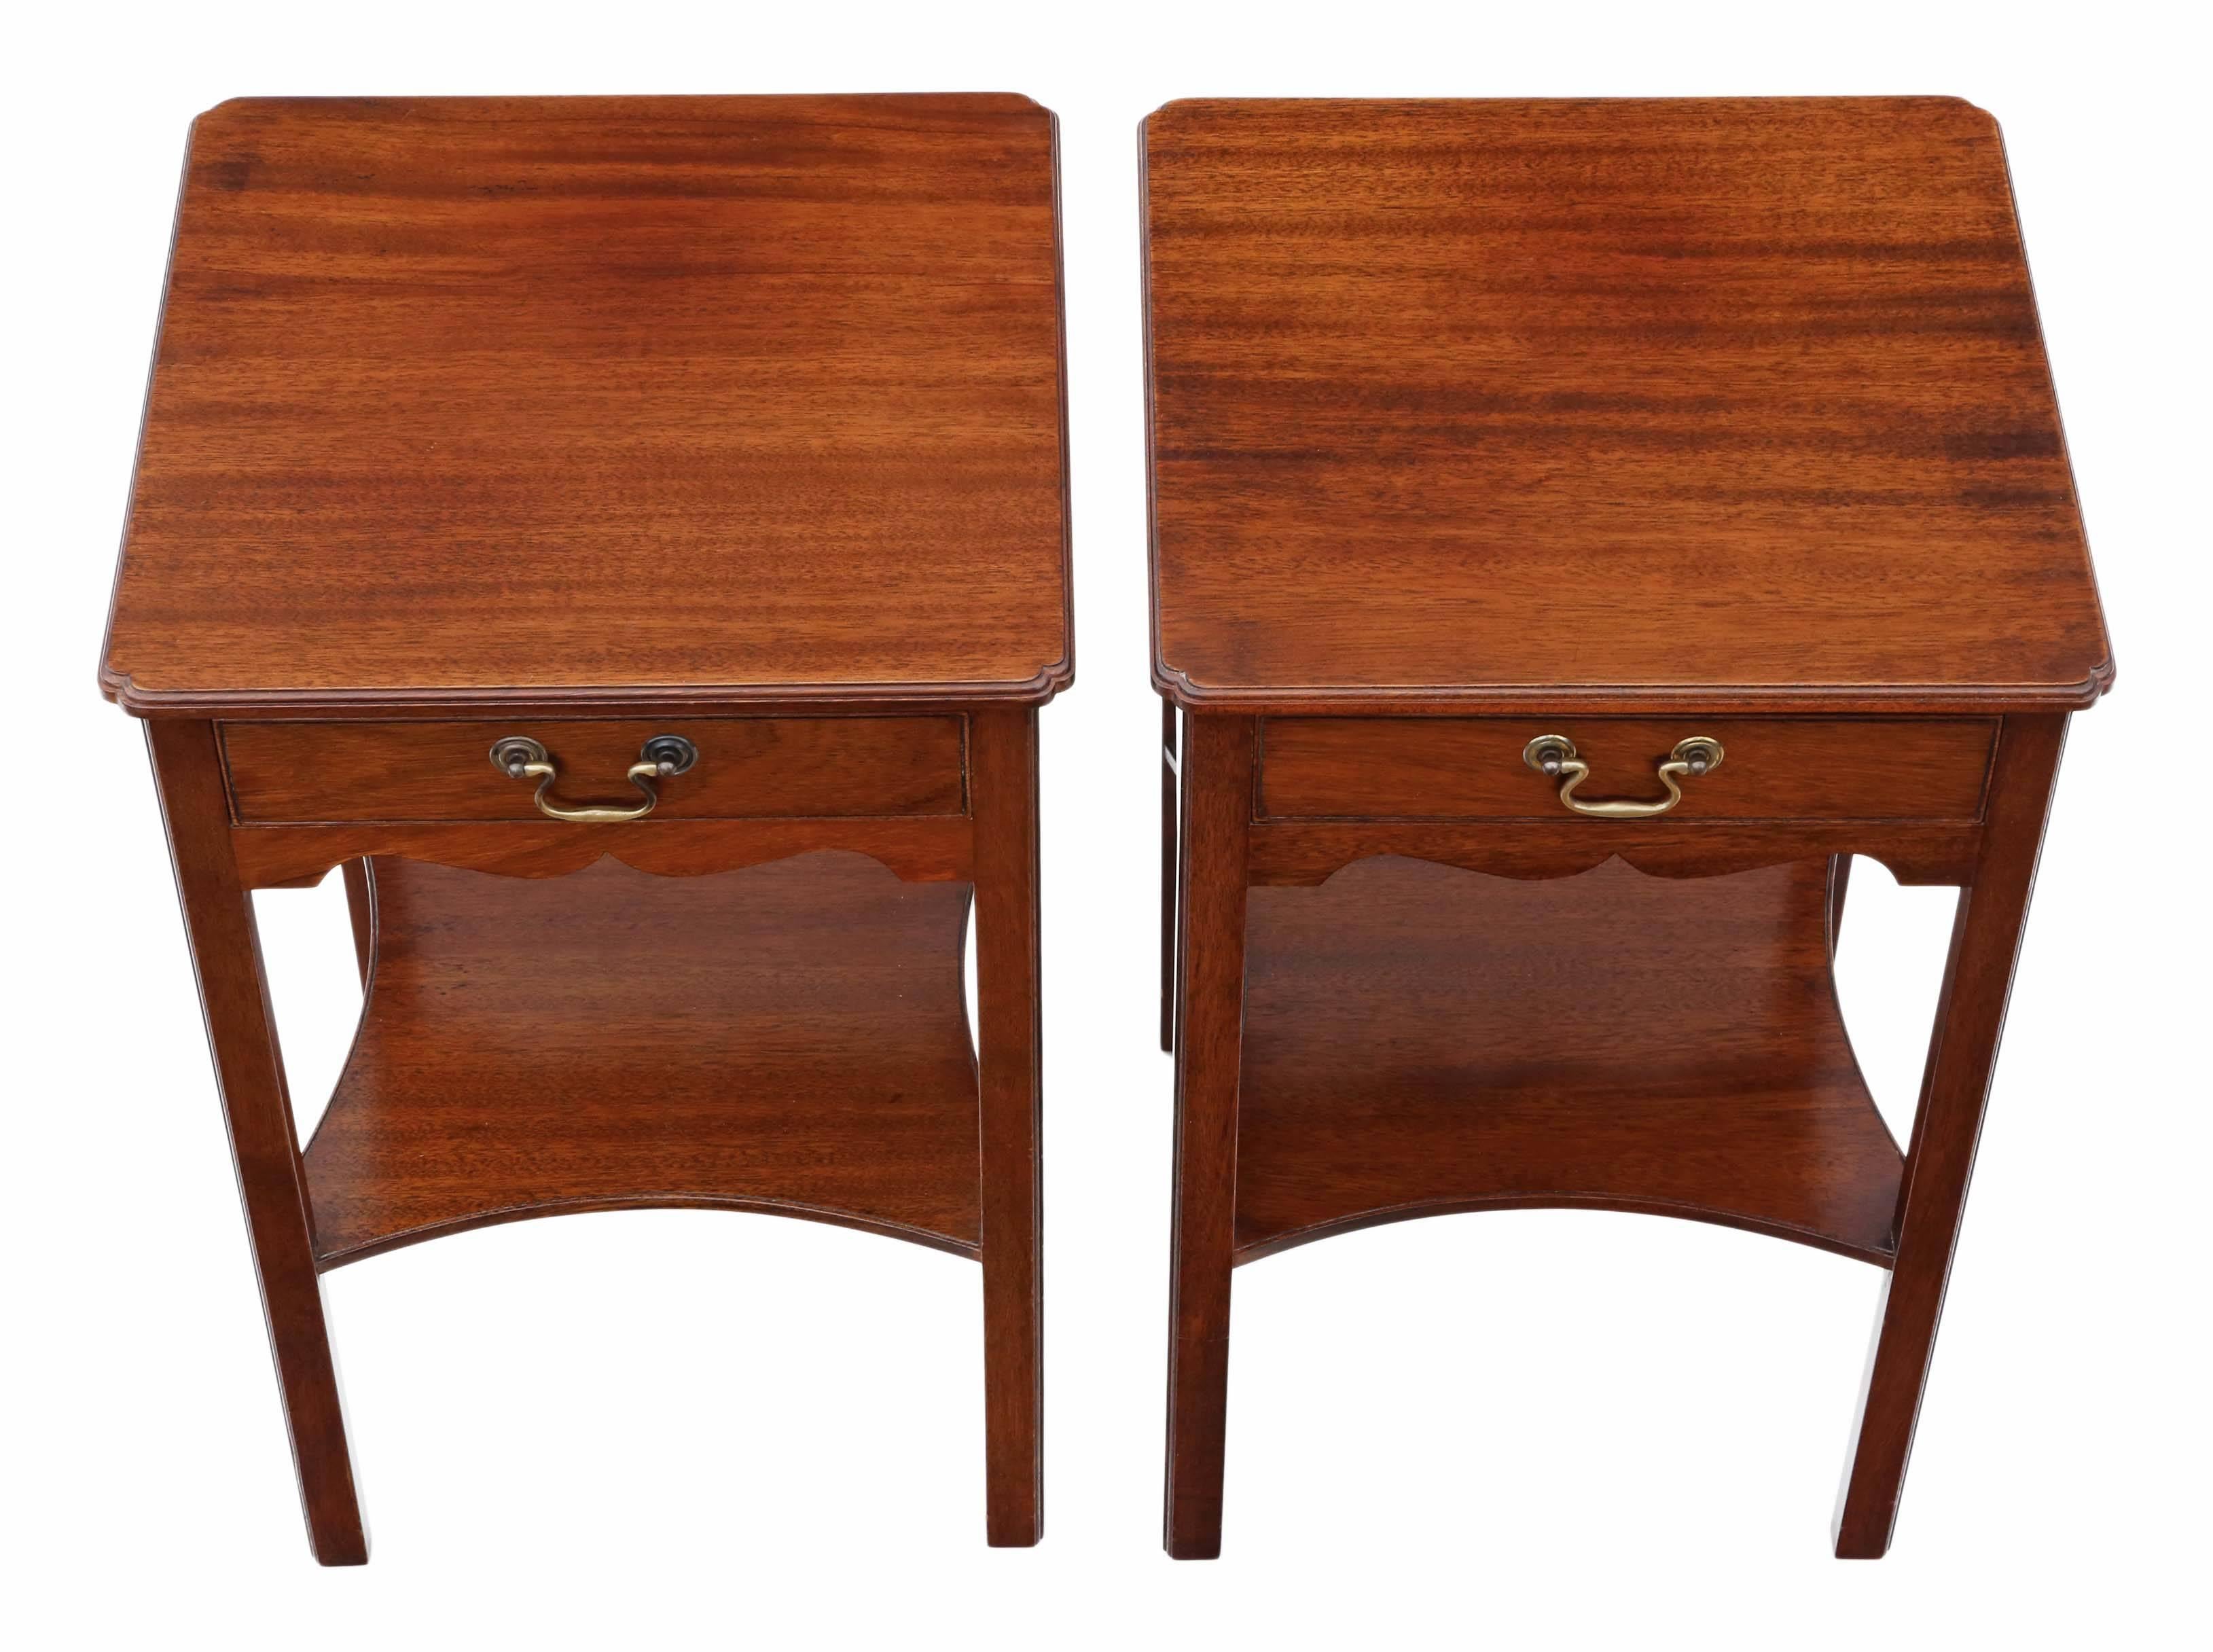 Quality pair of Georgian style mahogany bedside or lamp tables by Redman and Hales. These are very attractive reproduction/revival tables made in the late 20th century.

No loose joints. The drawers slide freely.

Would look great in the right